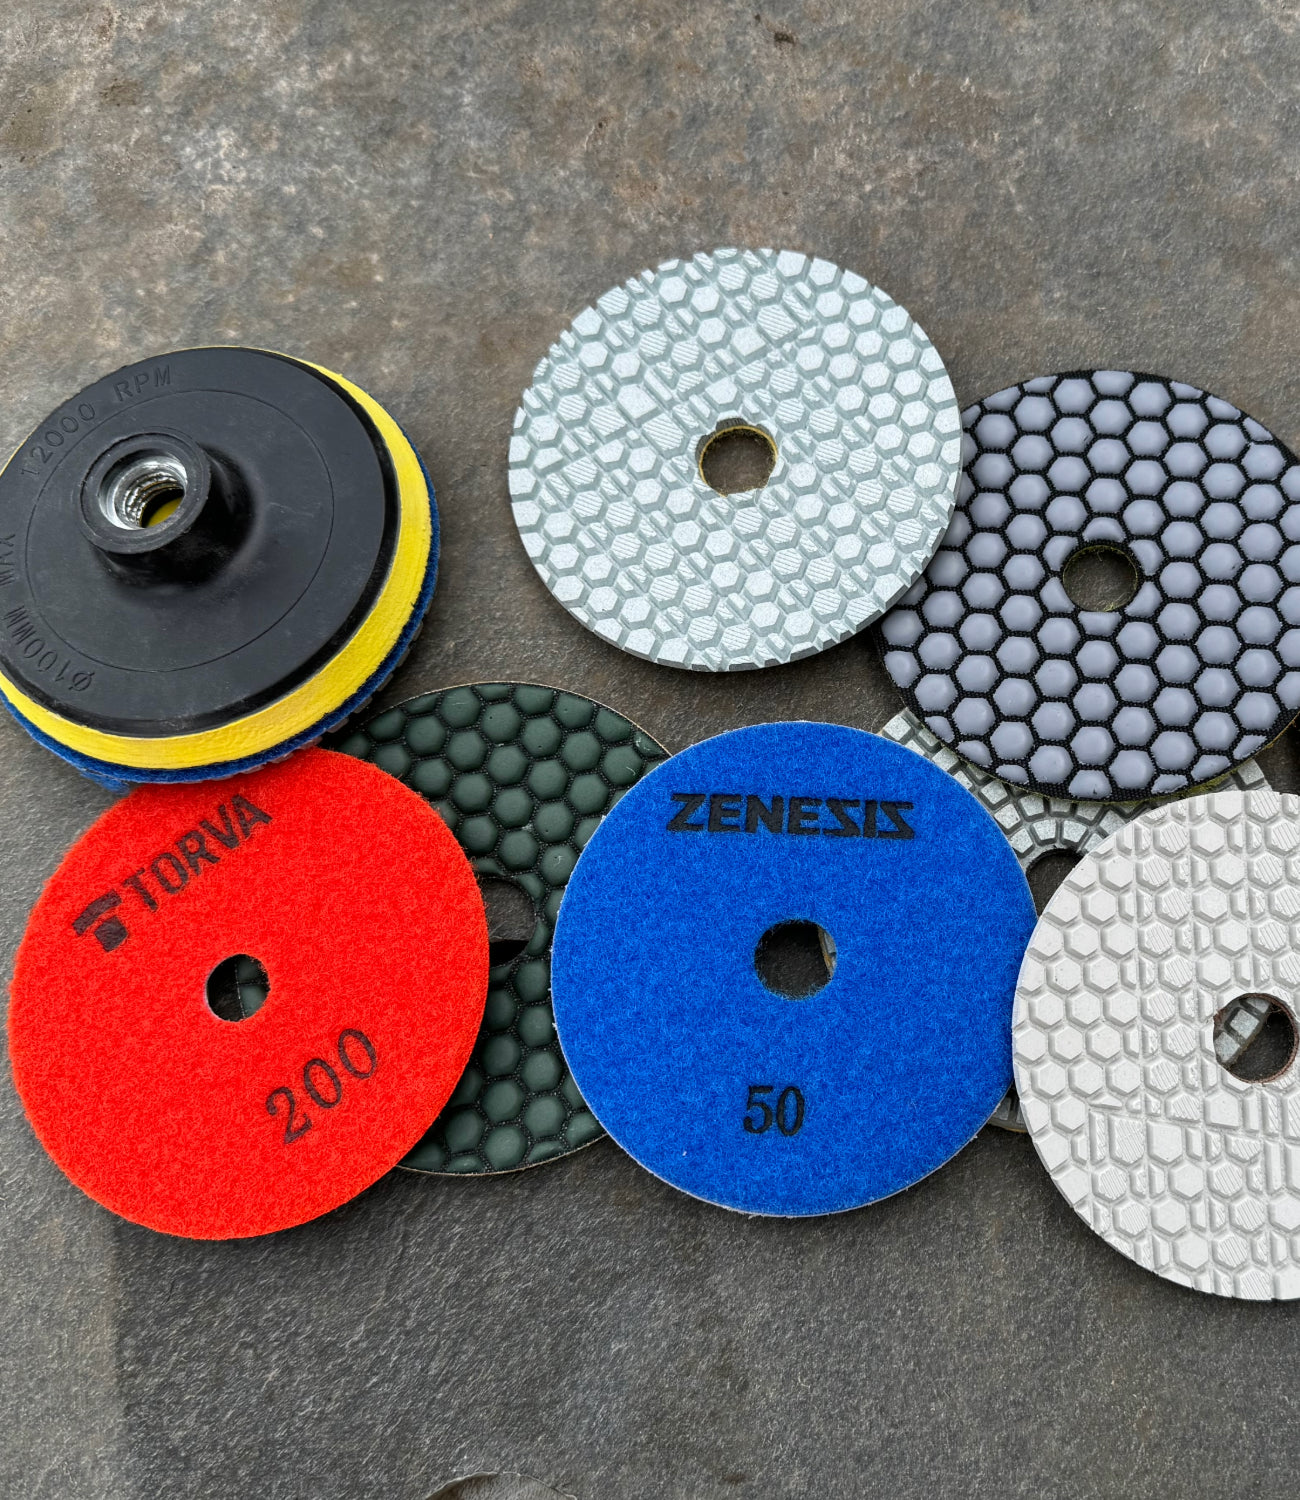 Set of colorful diamond polishing pads in various grits arranged neatly, designed for smoothing and finishing surfaces, highlighting their texture and quality.